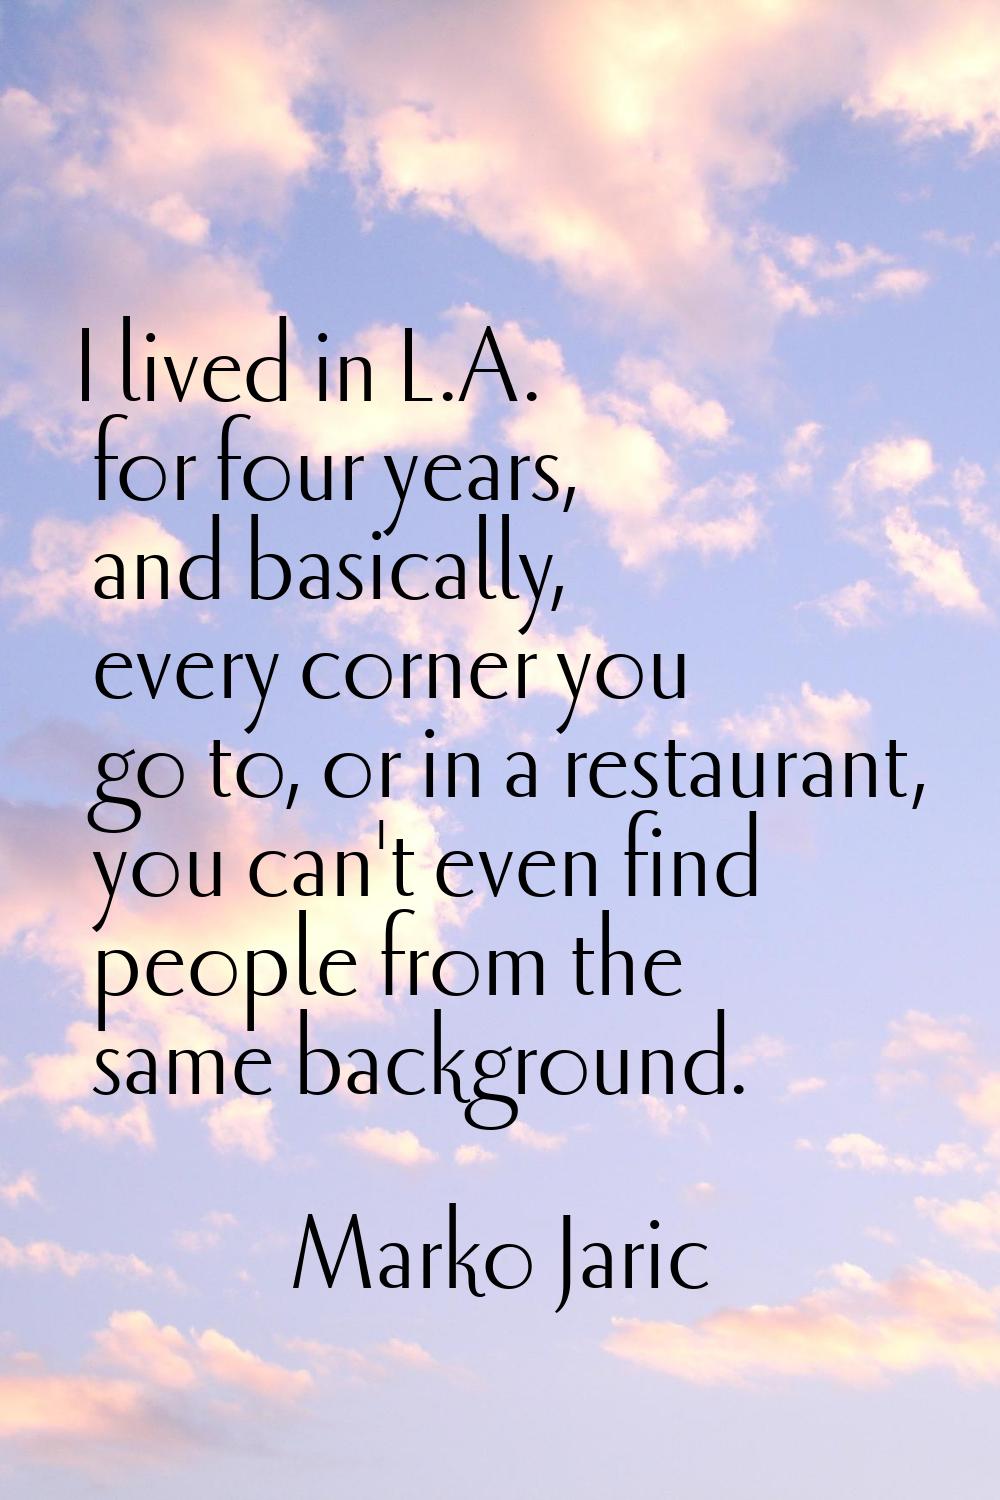 I lived in L.A. for four years, and basically, every corner you go to, or in a restaurant, you can'